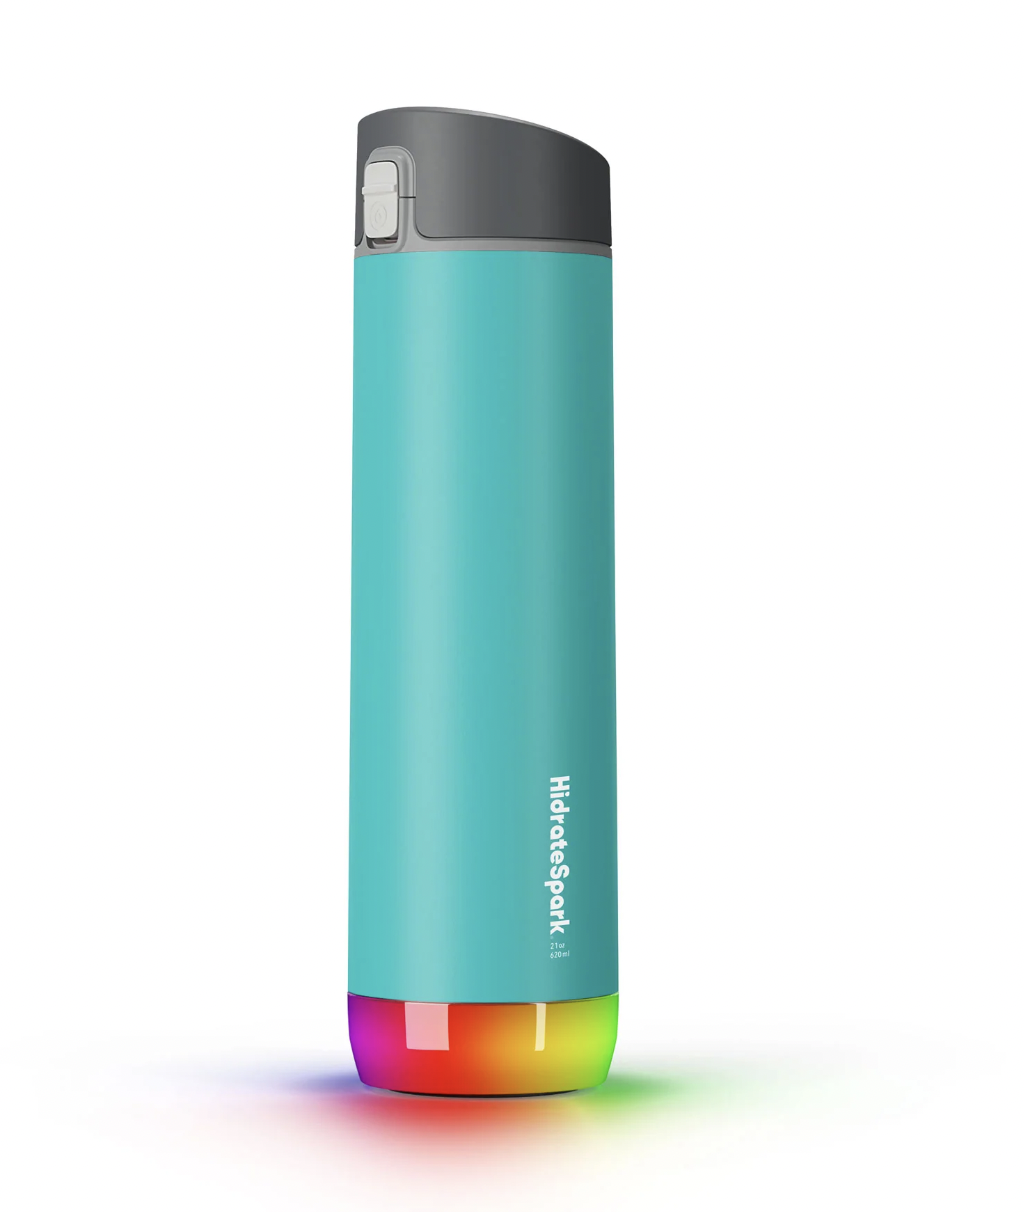 Hidrate Spark Smart Water Bottle Gift Guide 2022 theGrio.com